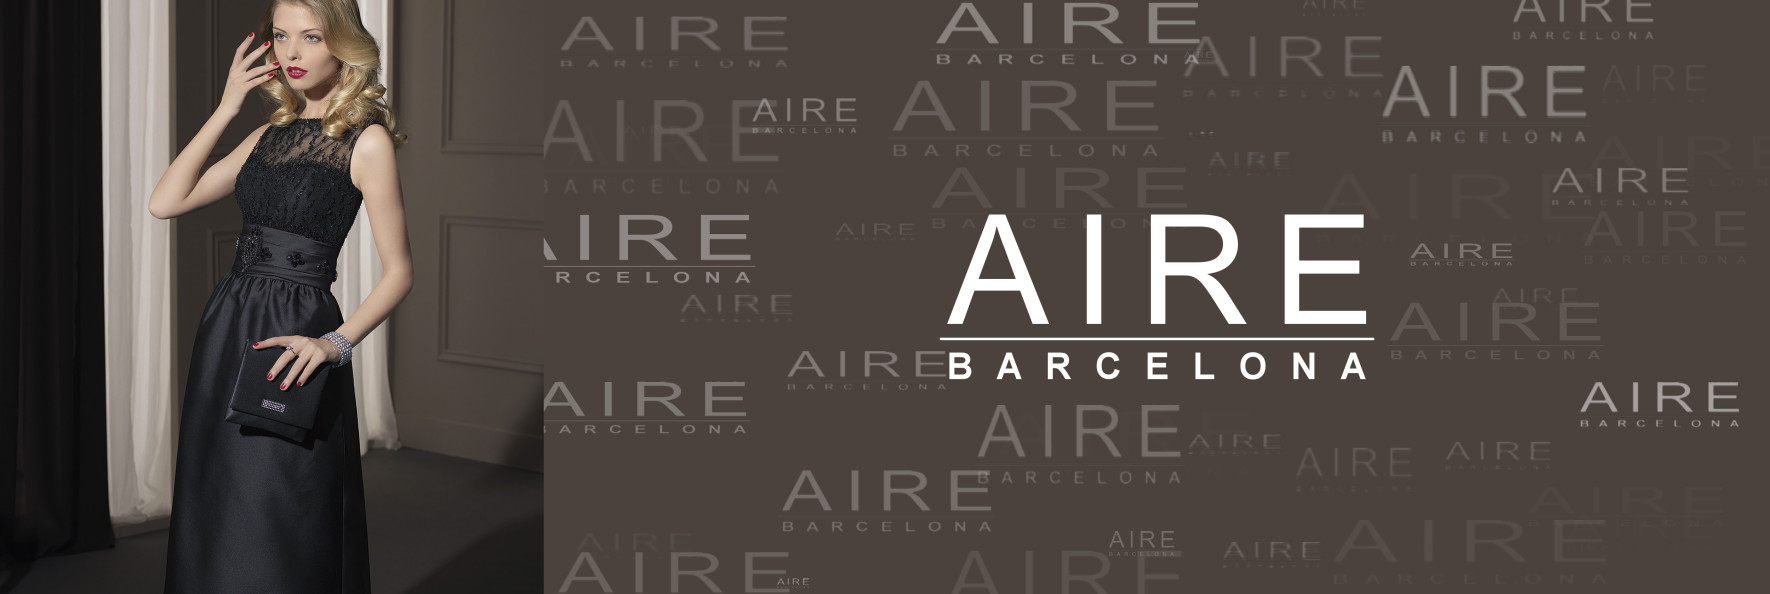 AIRE Barcelona